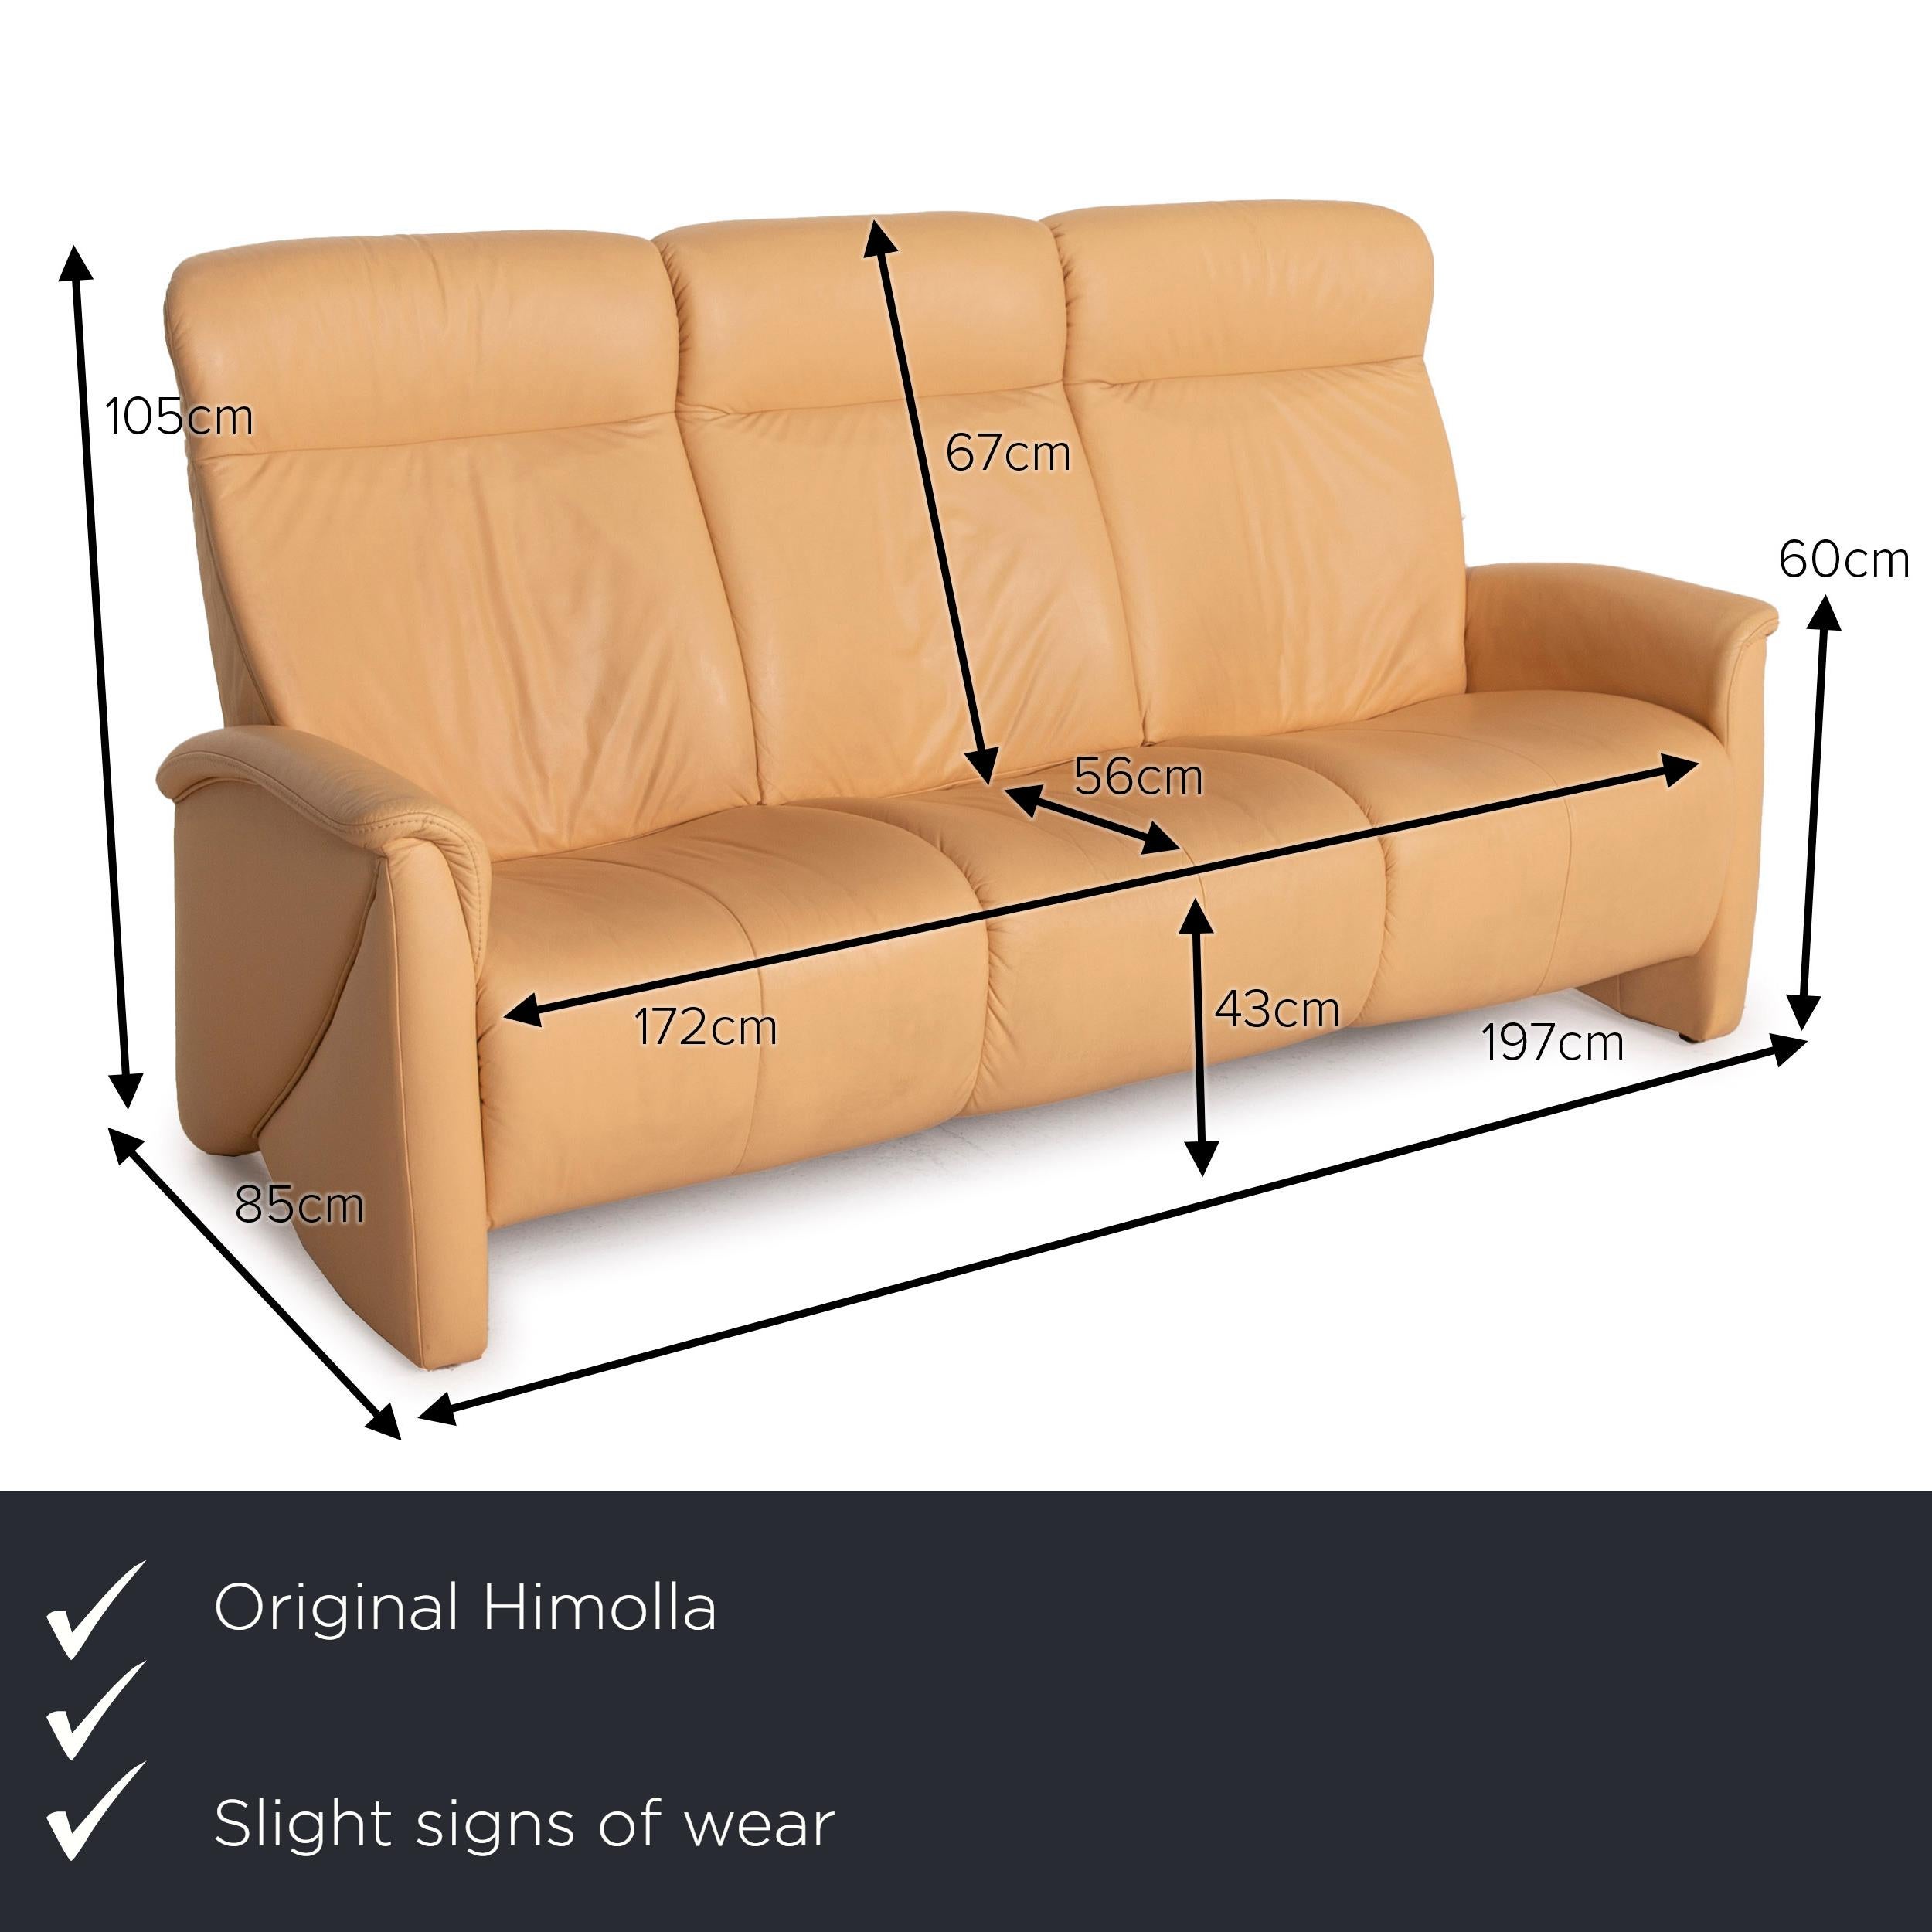 We present to you a Himolla leather sofa set beige three seater two seater set.


 Product measurements in centimeters:
 

Depth: 85
Width: 197
Height: 105
Seat height: 43
Rest height: 60
Seat depth: 56
Seat width: 172
Back height: